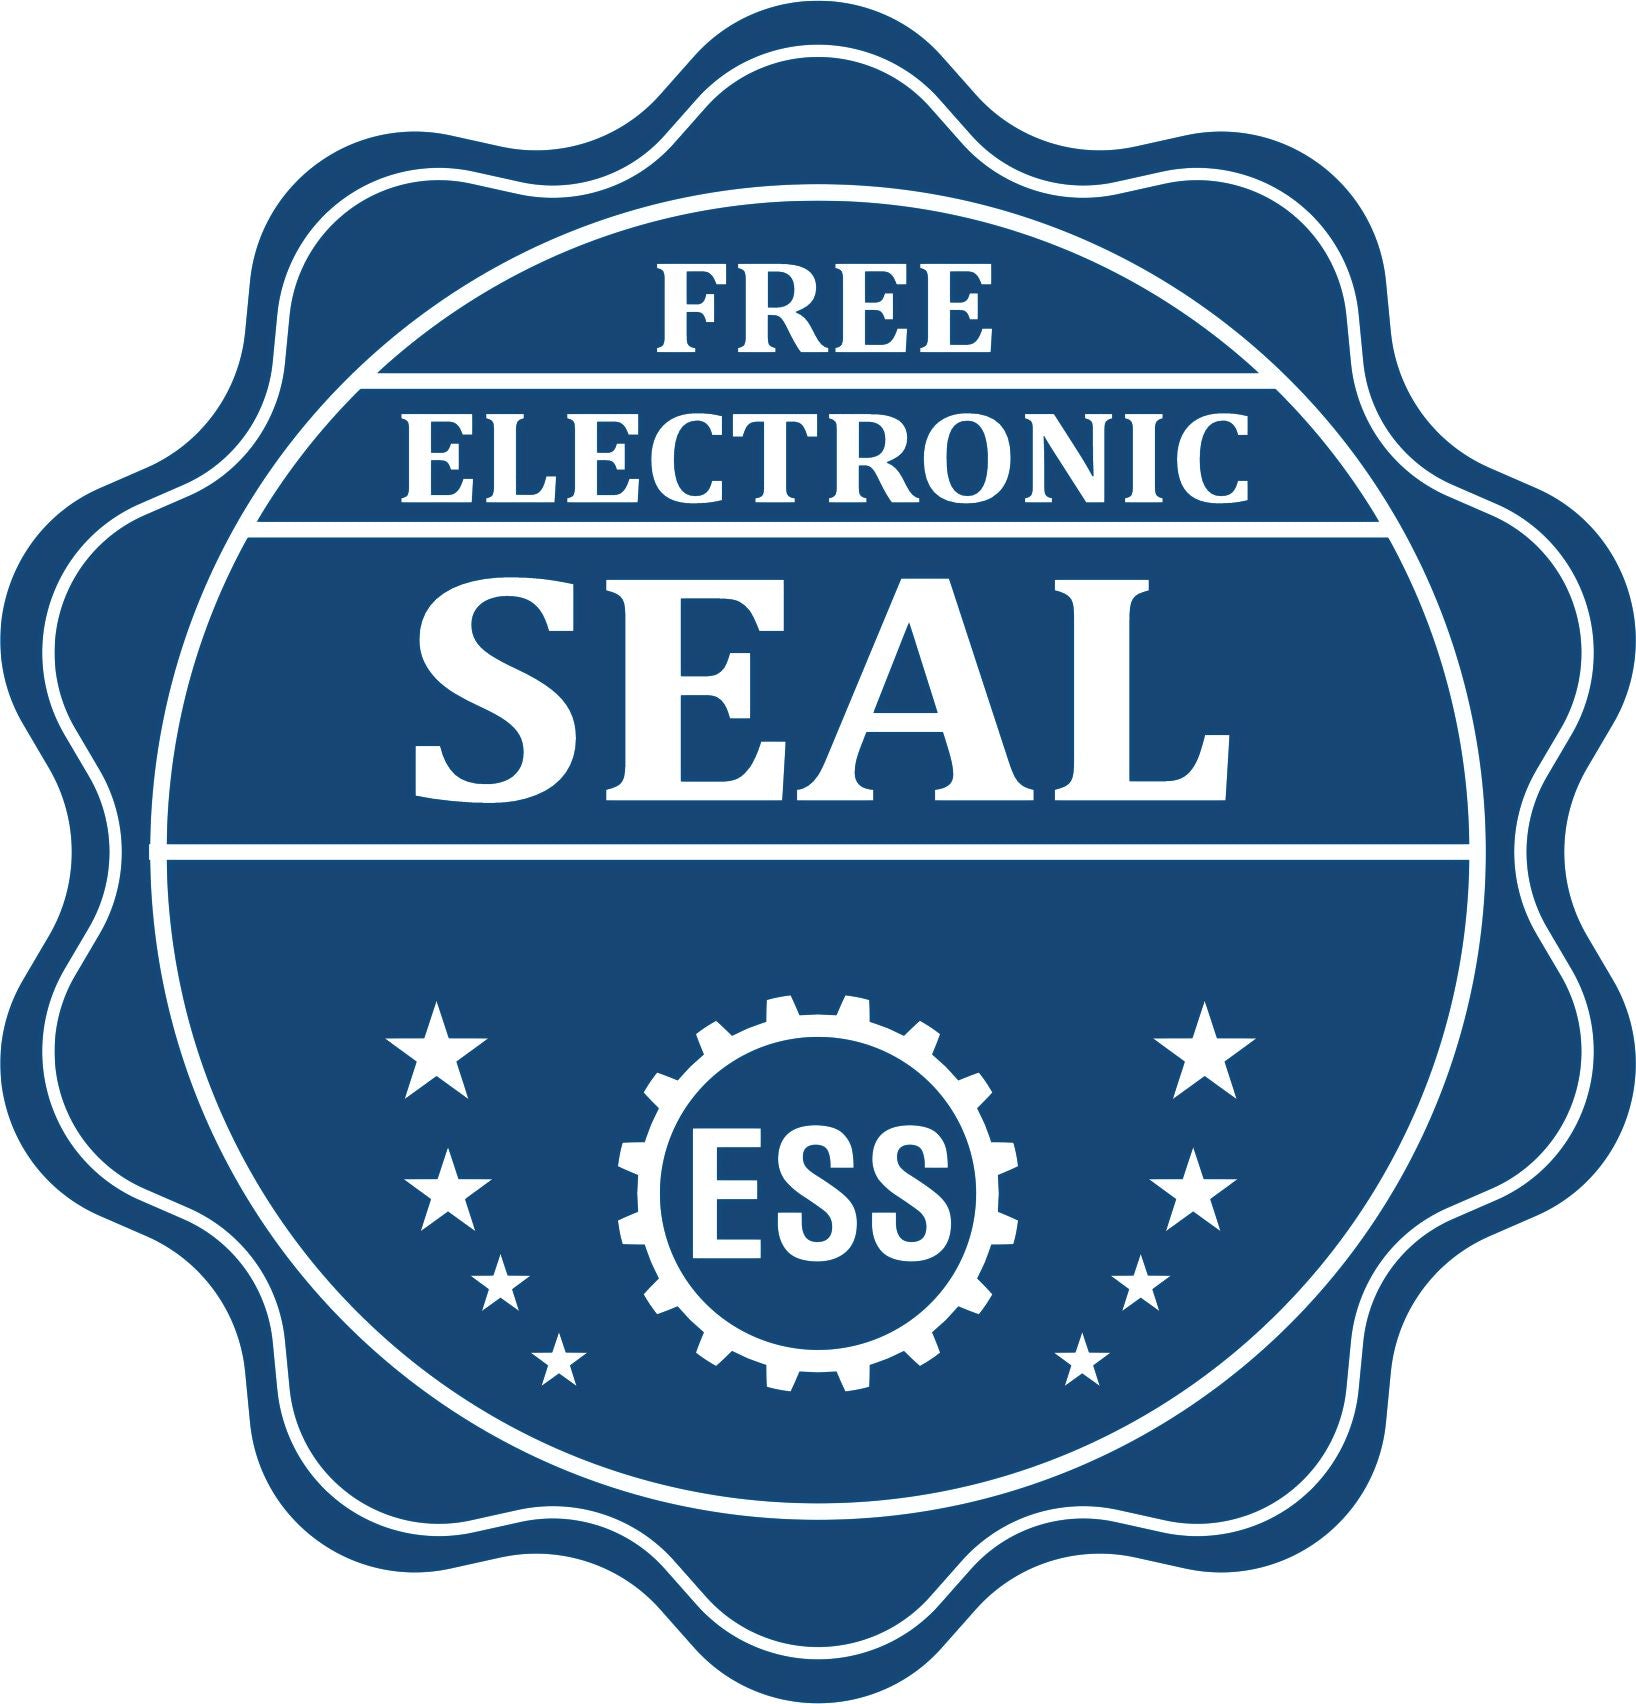 A badge showing a free electronic seal for the PSI New Mexico Notary Stamp with stars and the ESS gear on the emblem.